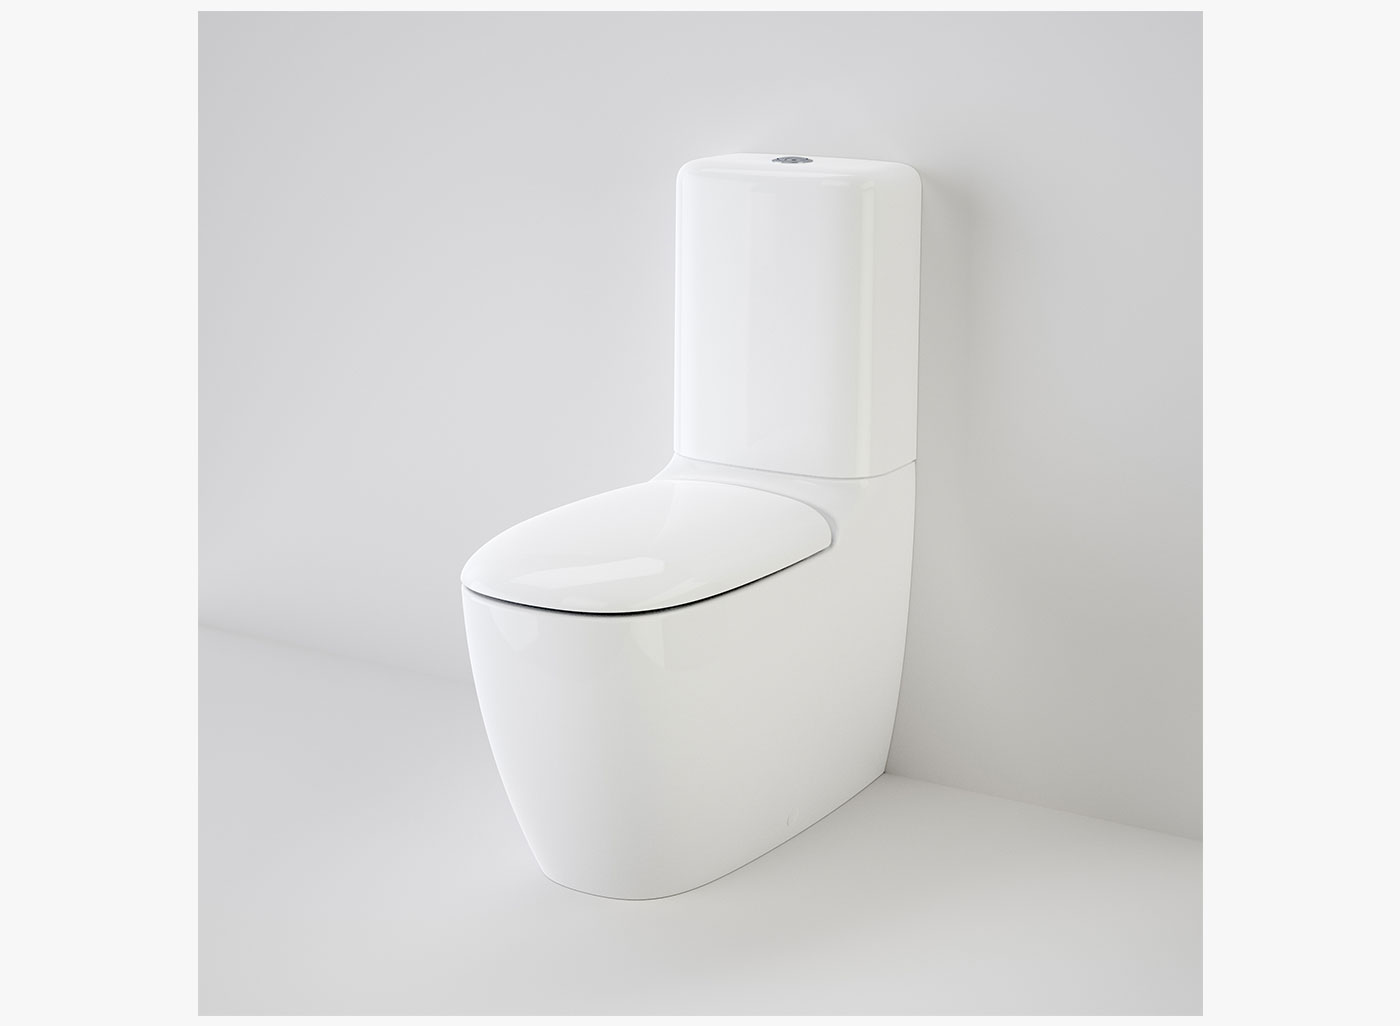 Contura toilet suites deliver ageless beauty. Featuring an organic curved design